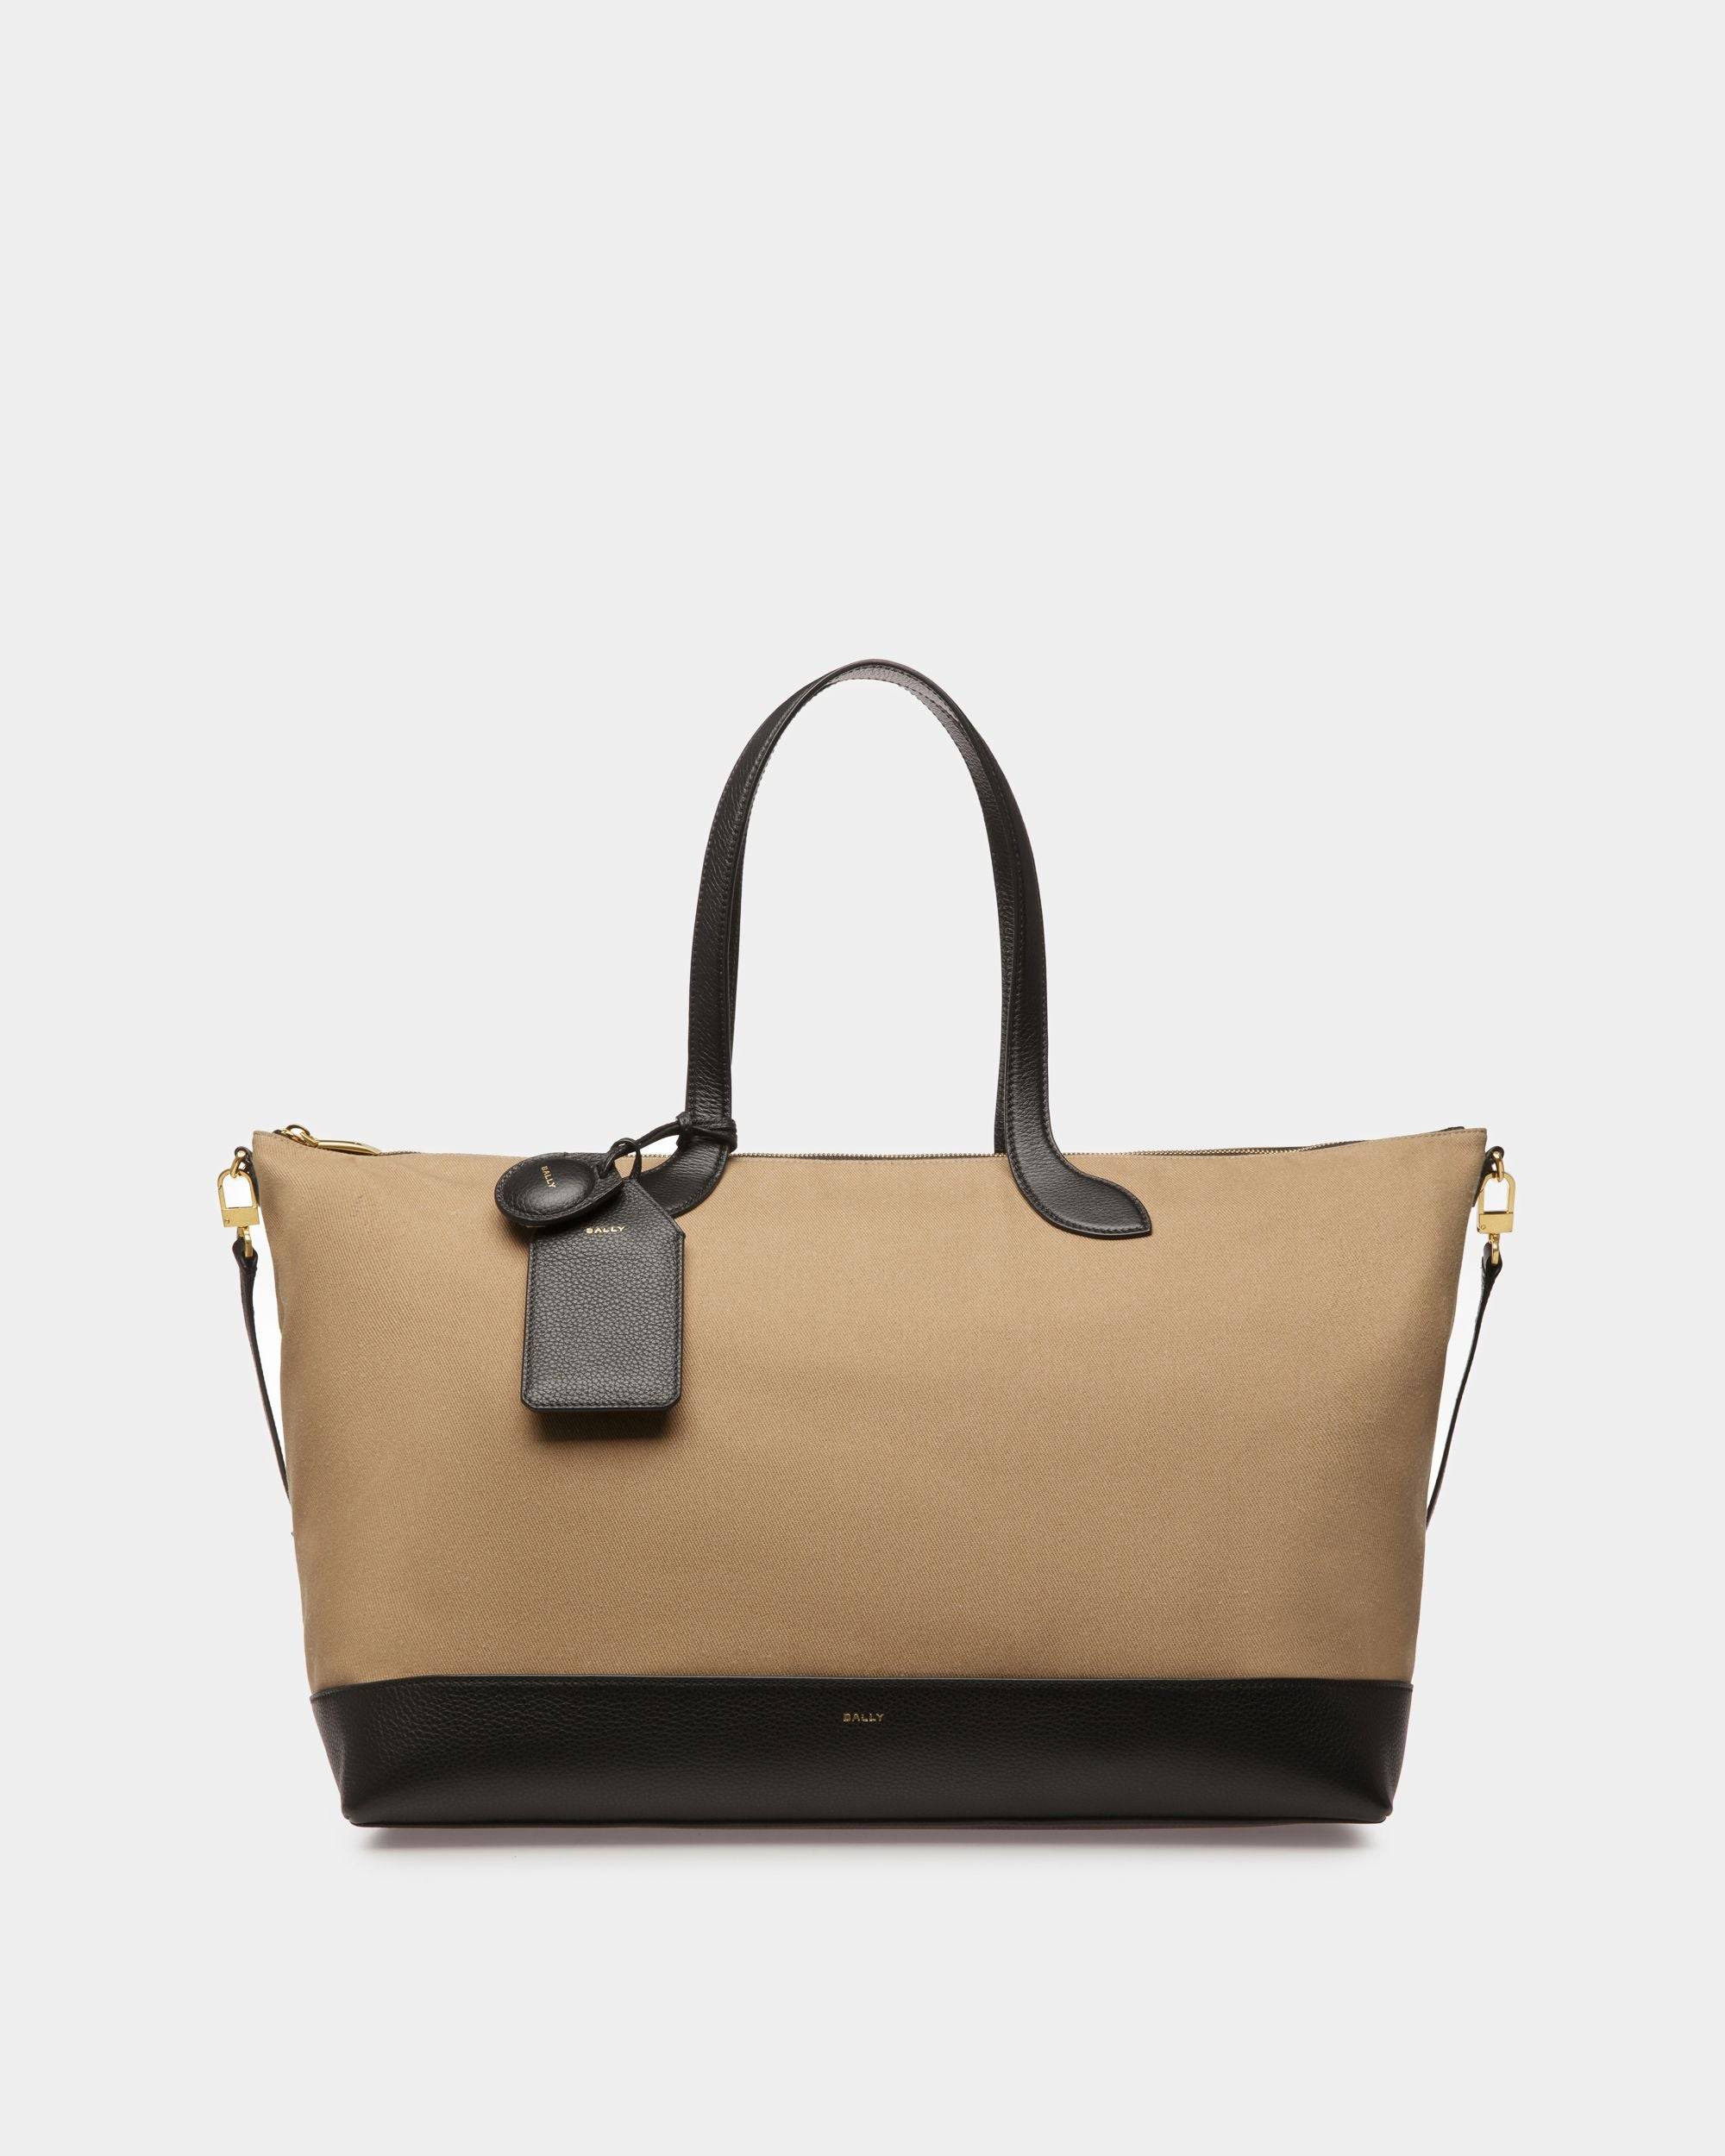 Women's Bar Tote Bag In sand And Black Fabric | Bally | Still Life Front